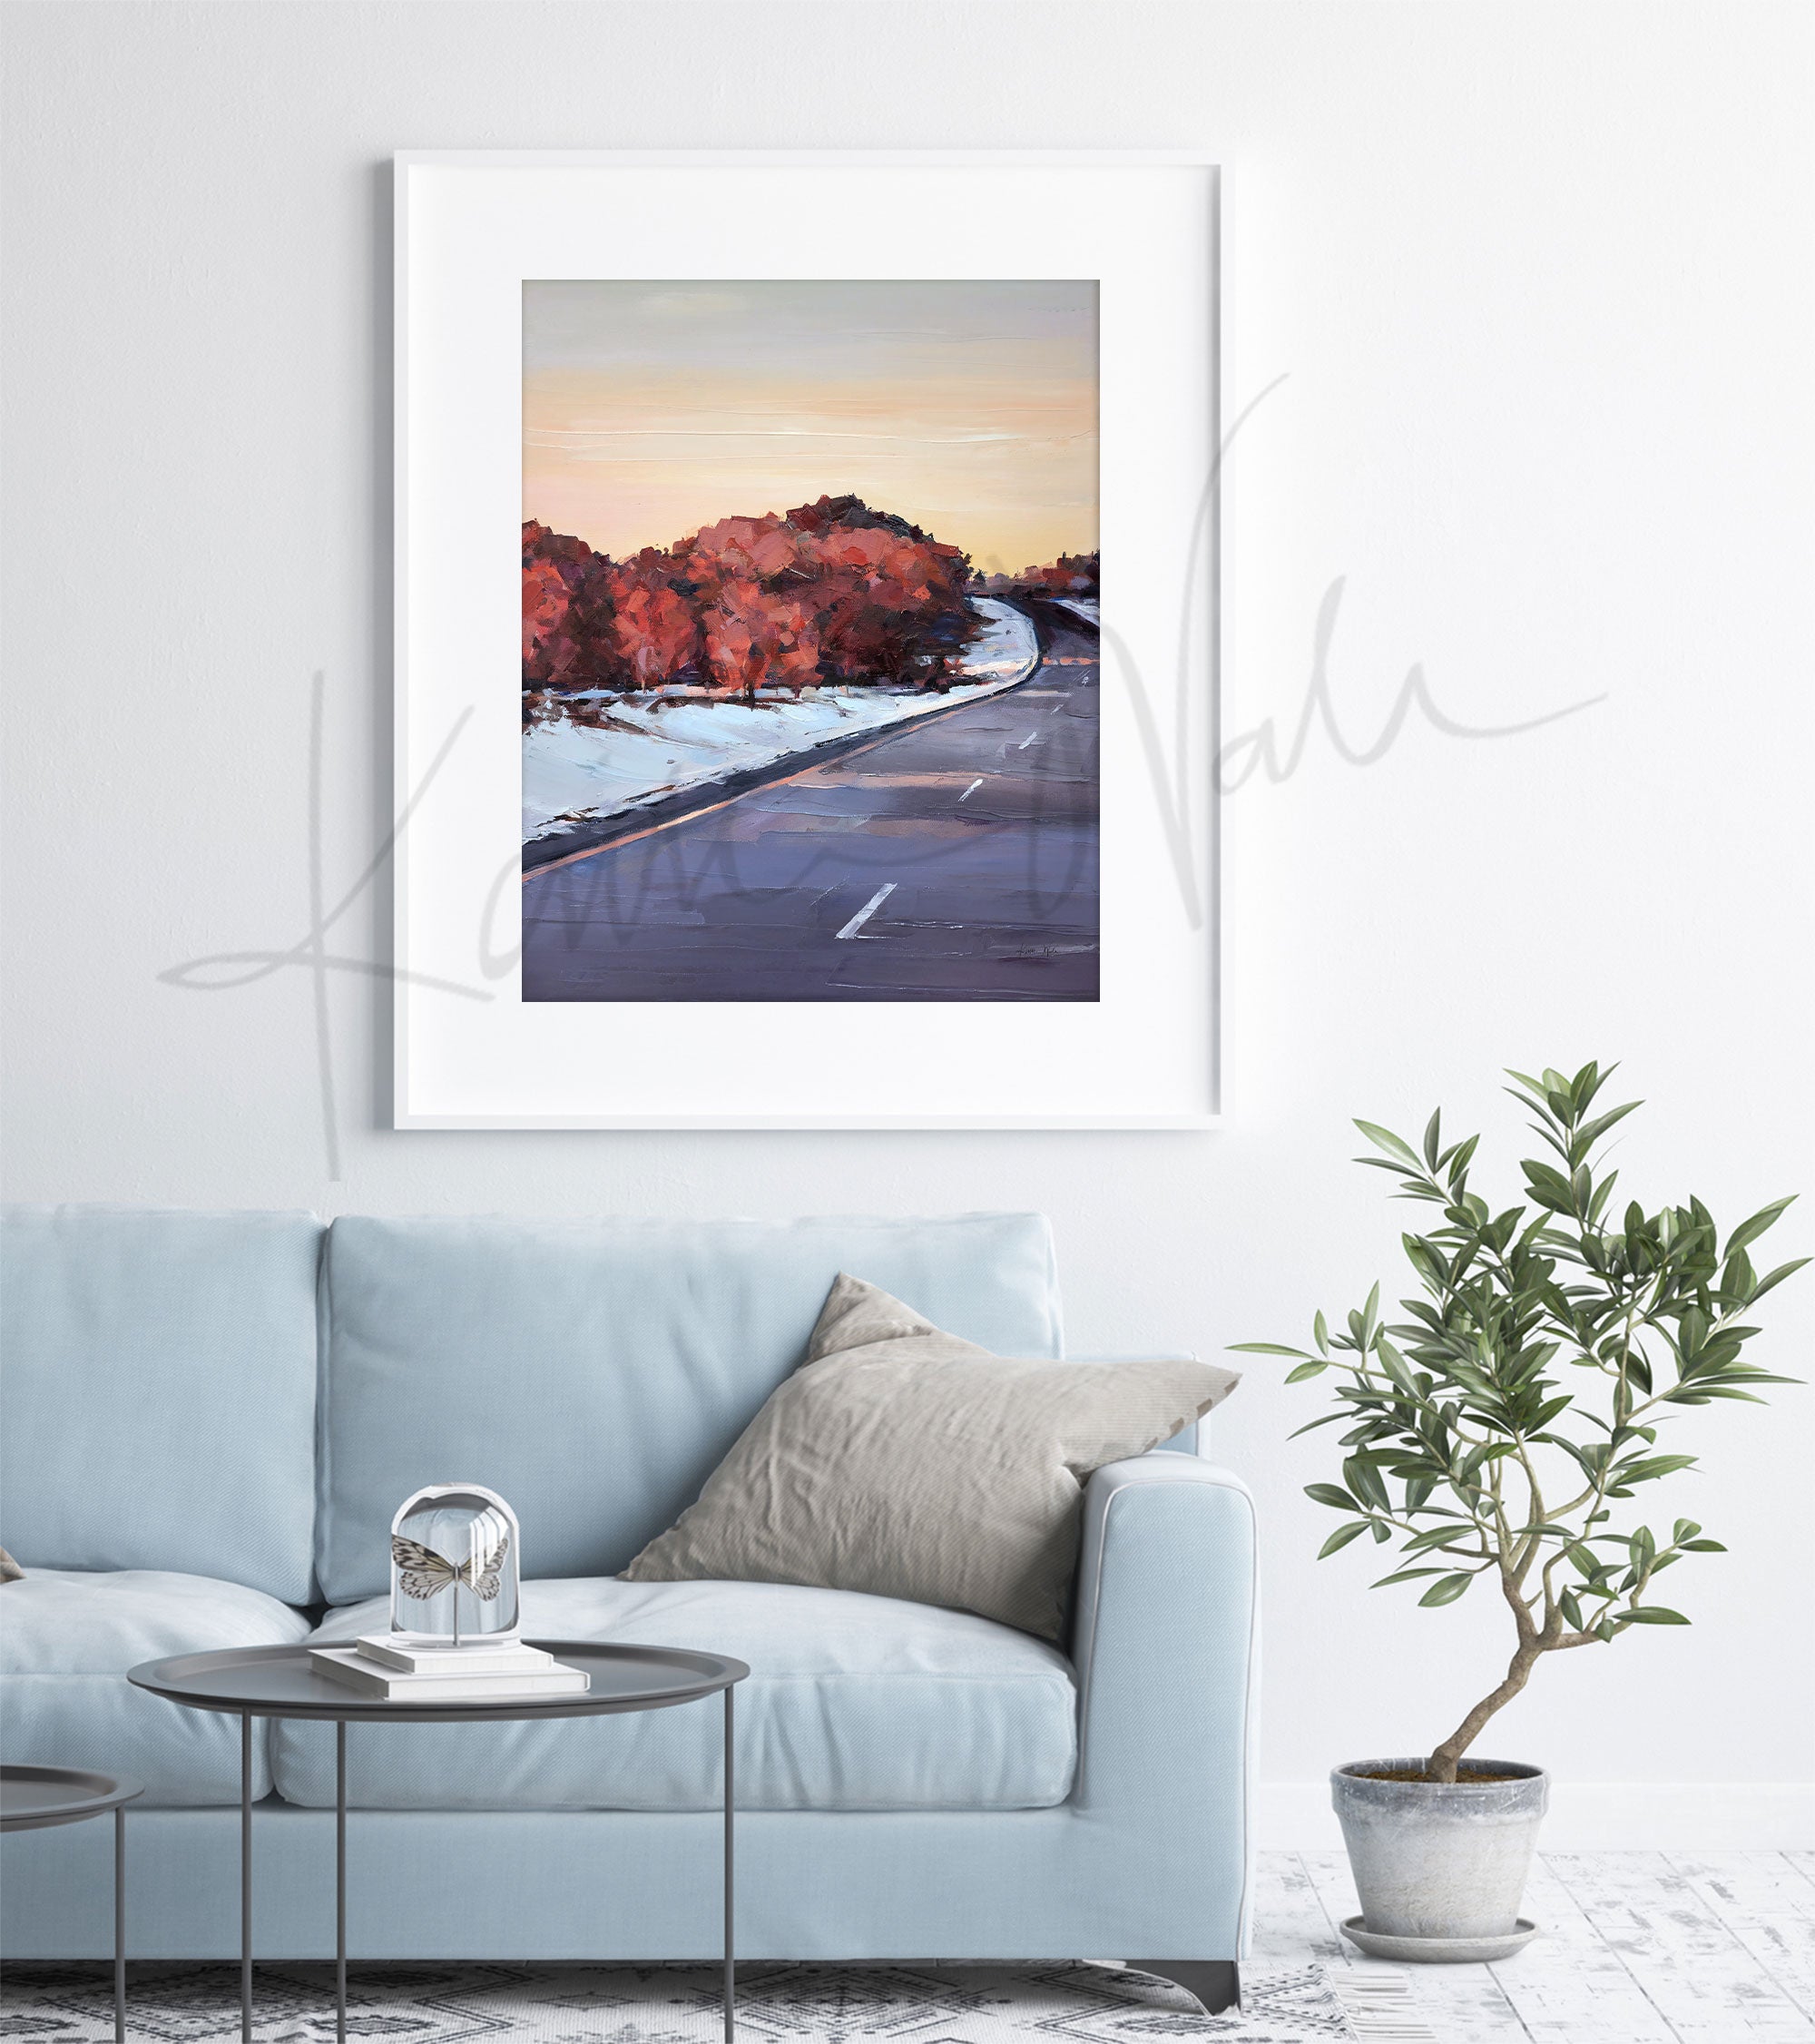 Framed watercolor painting of a snowy Wisconsin landscape in the spring. The painting is hanging over a blue couch.